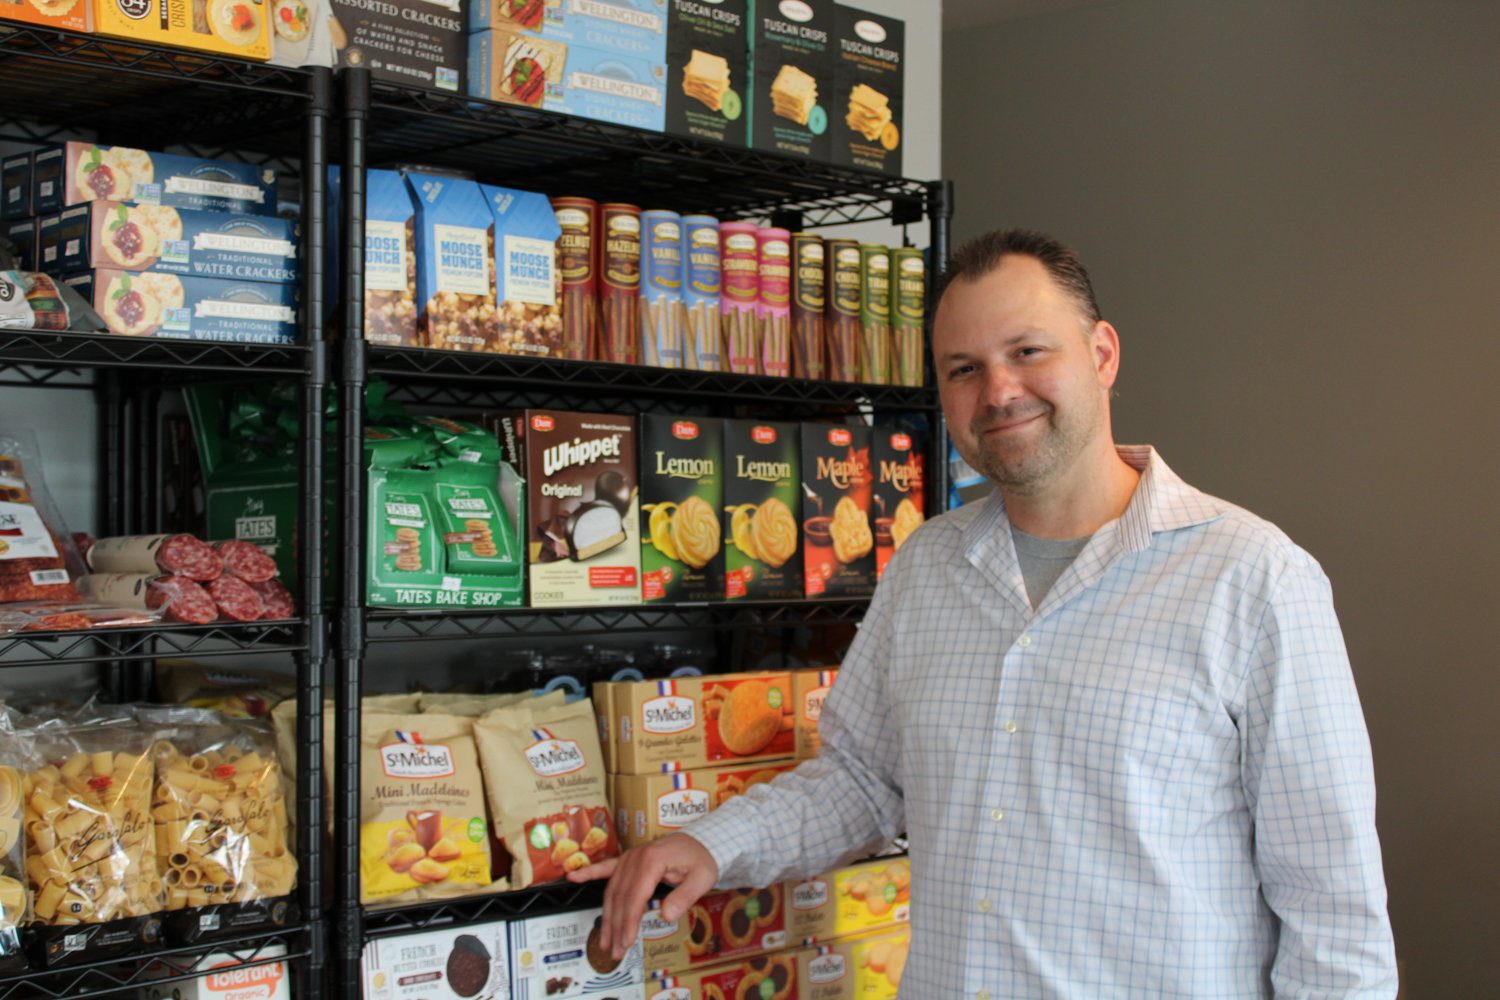 After 25 years in the food industry, Lucas Grecky has opened his own shop, the Mason Jar, in Kauneonga Lake.